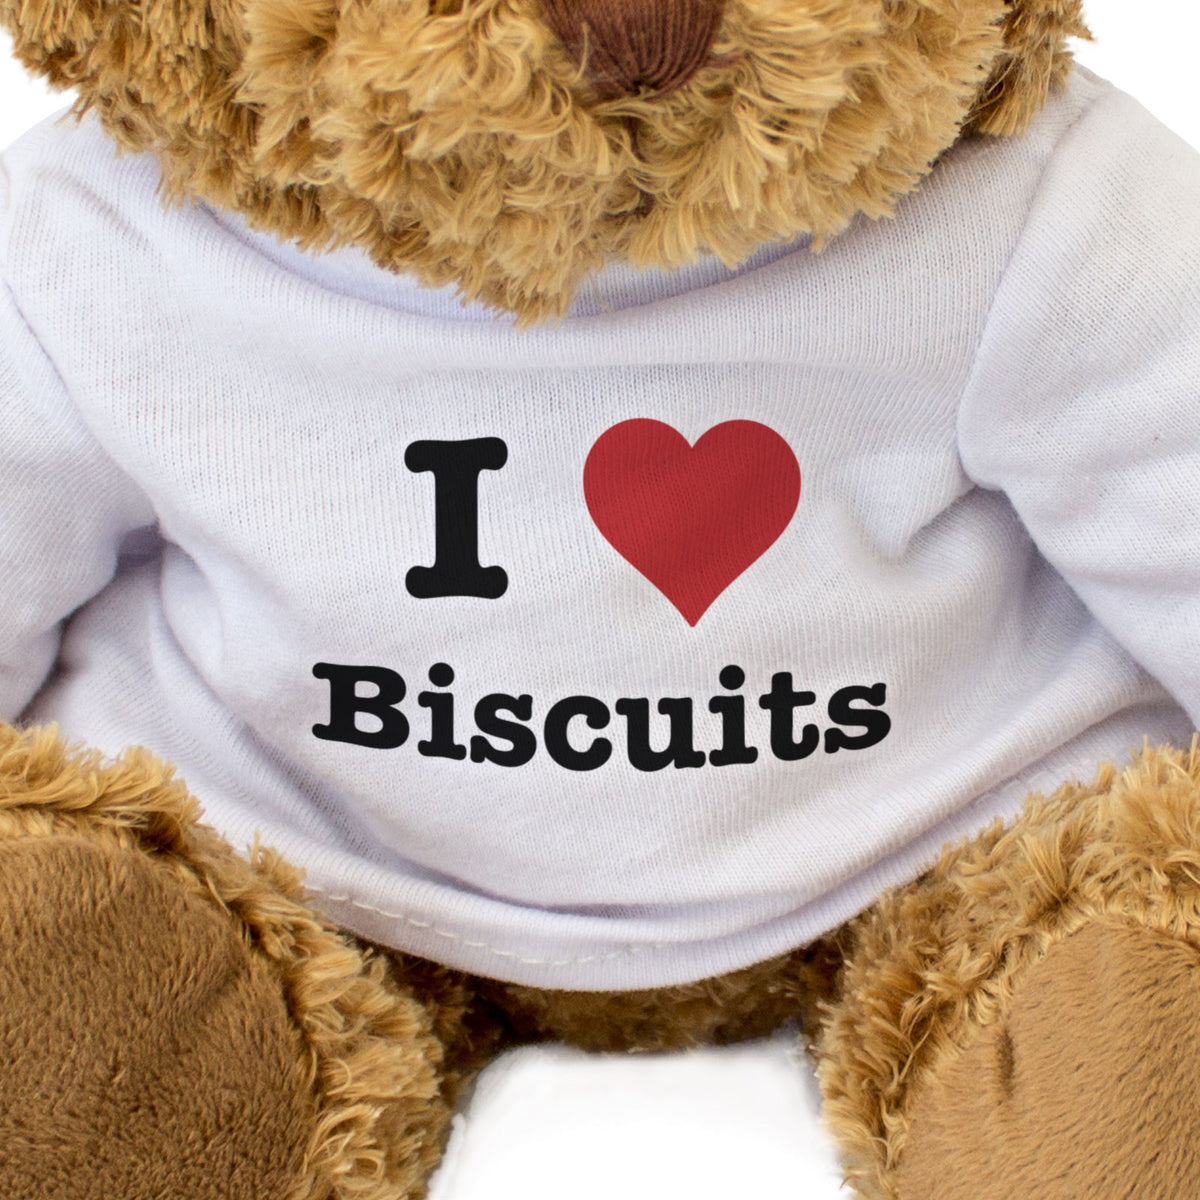 I Love Biscuits - Teddy Bear